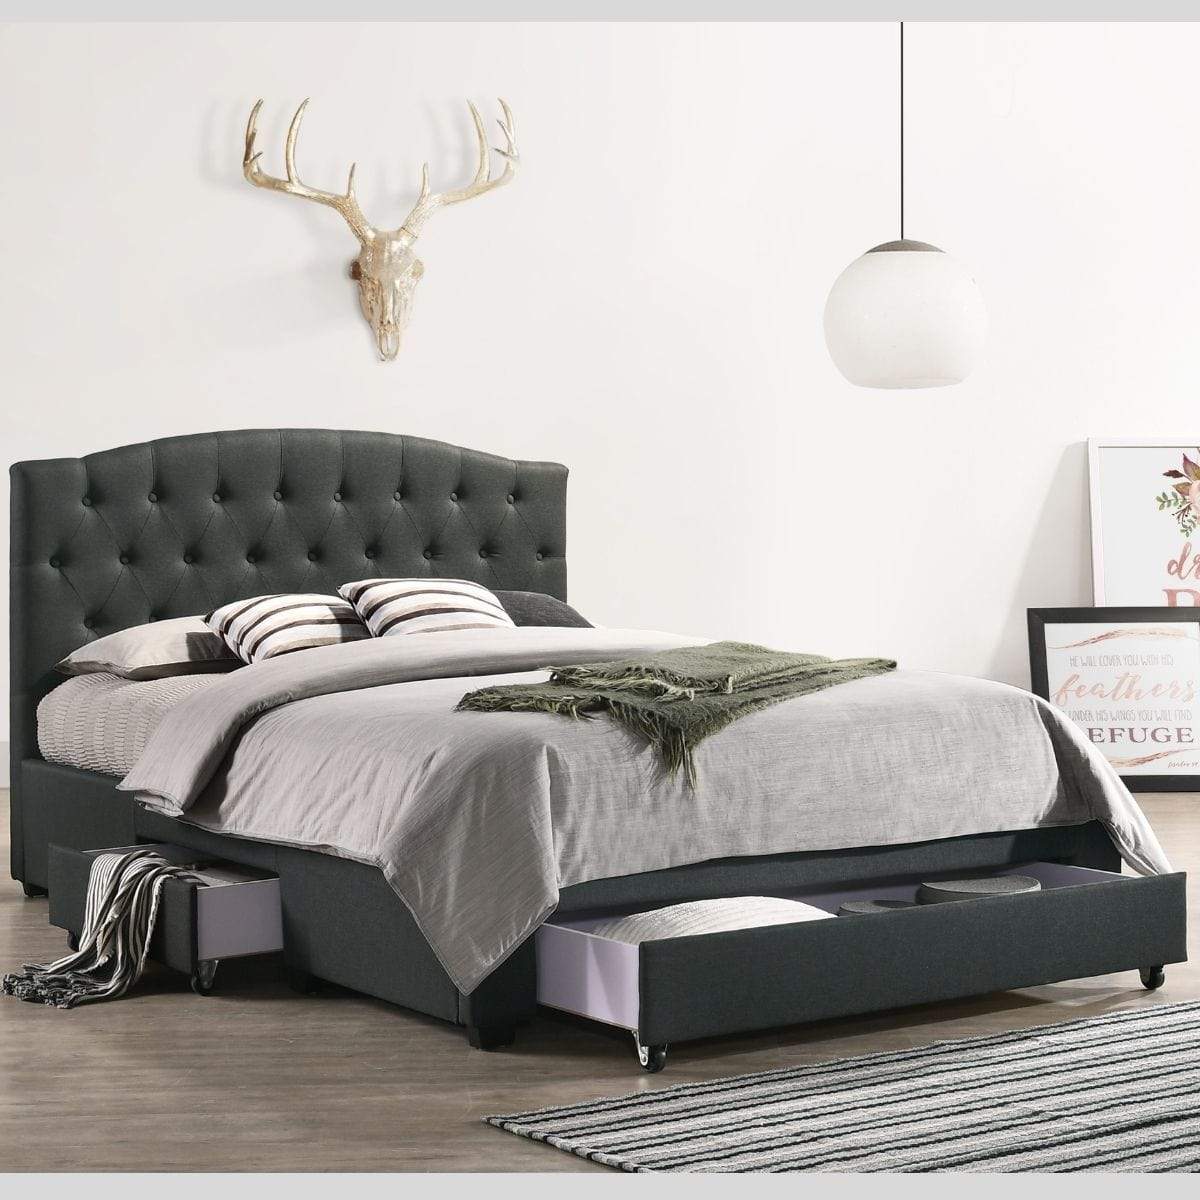 French Provincial Modern Fabric Platform Bed Base Frame with Storage Drawers Queen Charcoal - Newstart Furniture